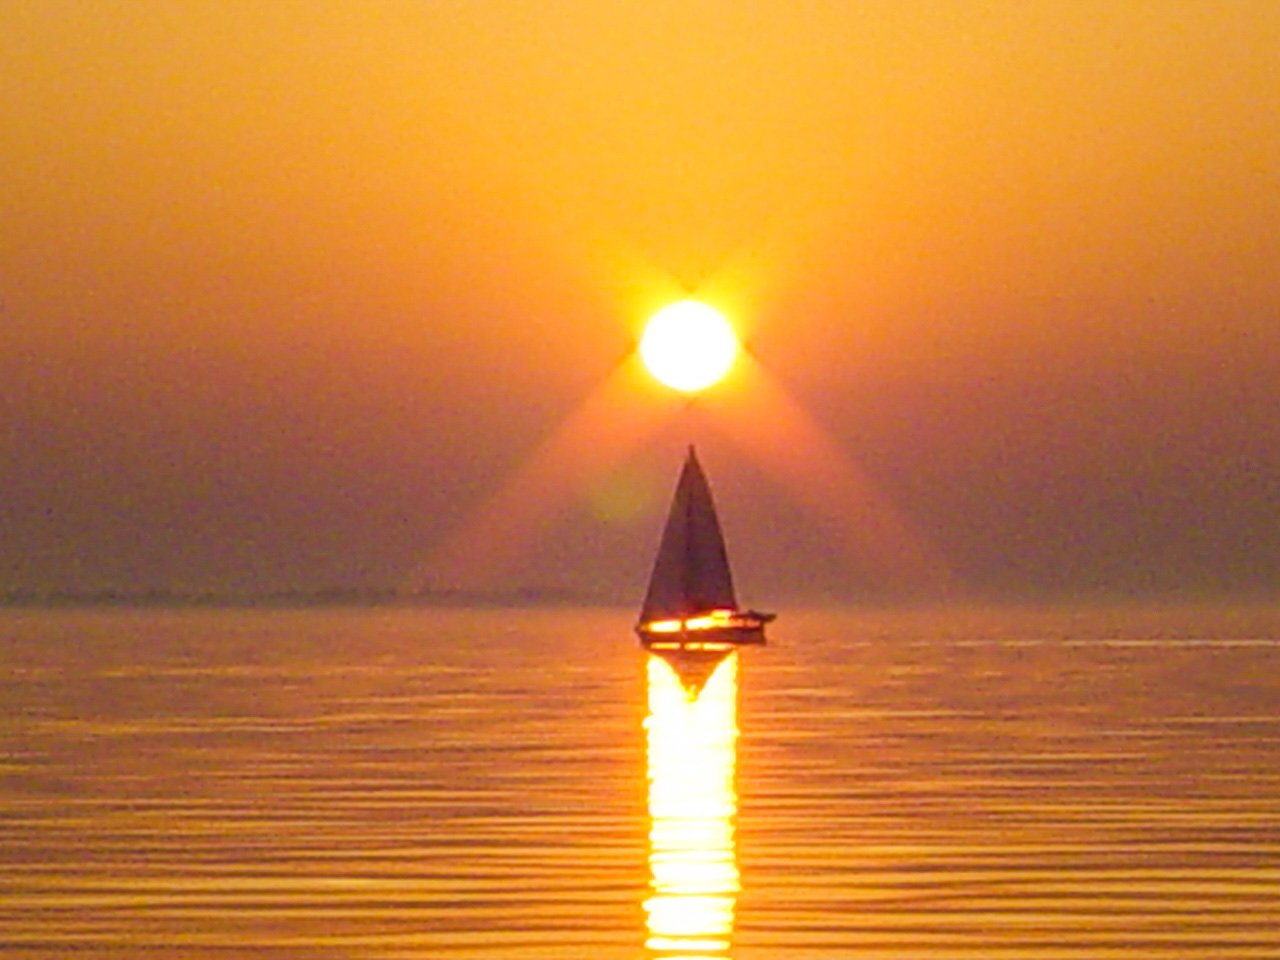 SAILING OFF INTO THE SUNSET, THE DREAM UNFOLDS!